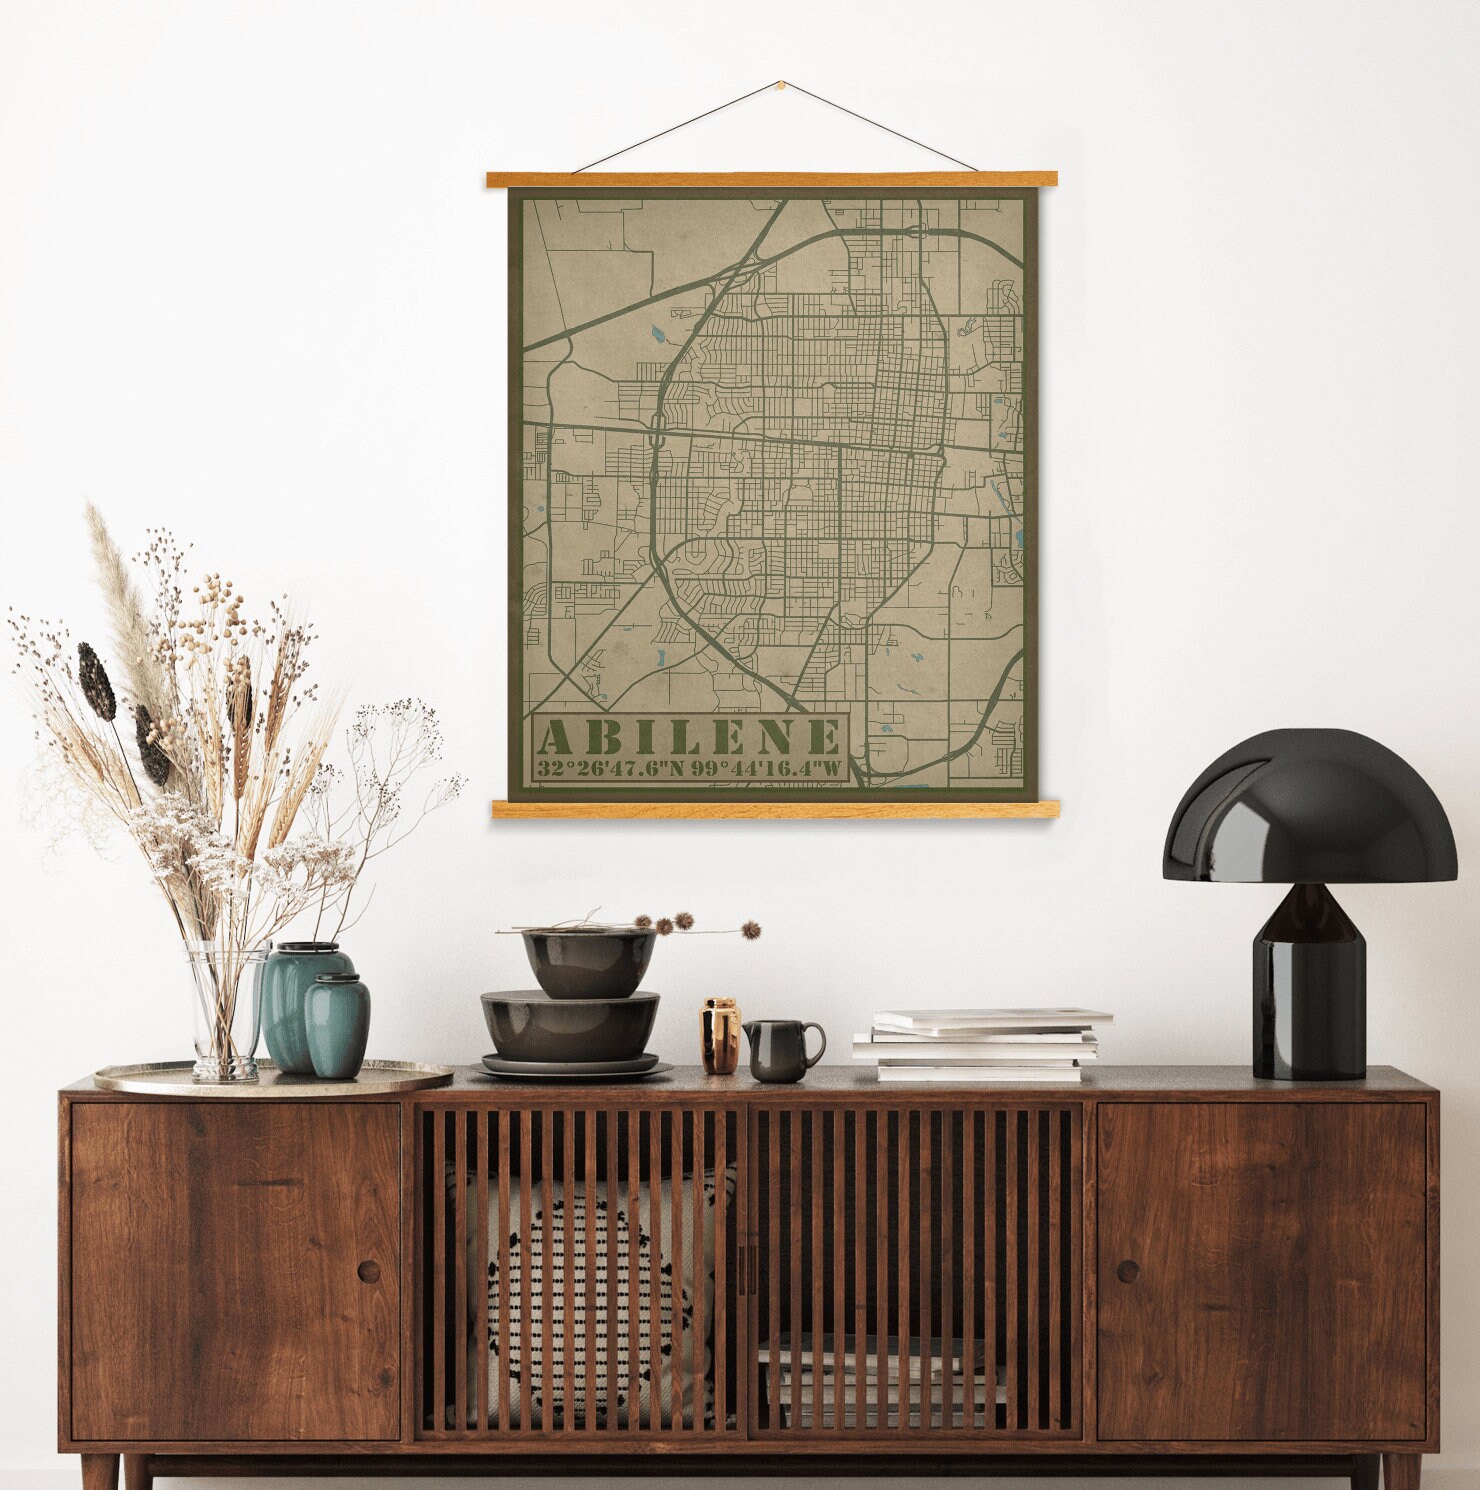 Abilene Texas Street Map | Hanging Canvas Of Printed Marketplace